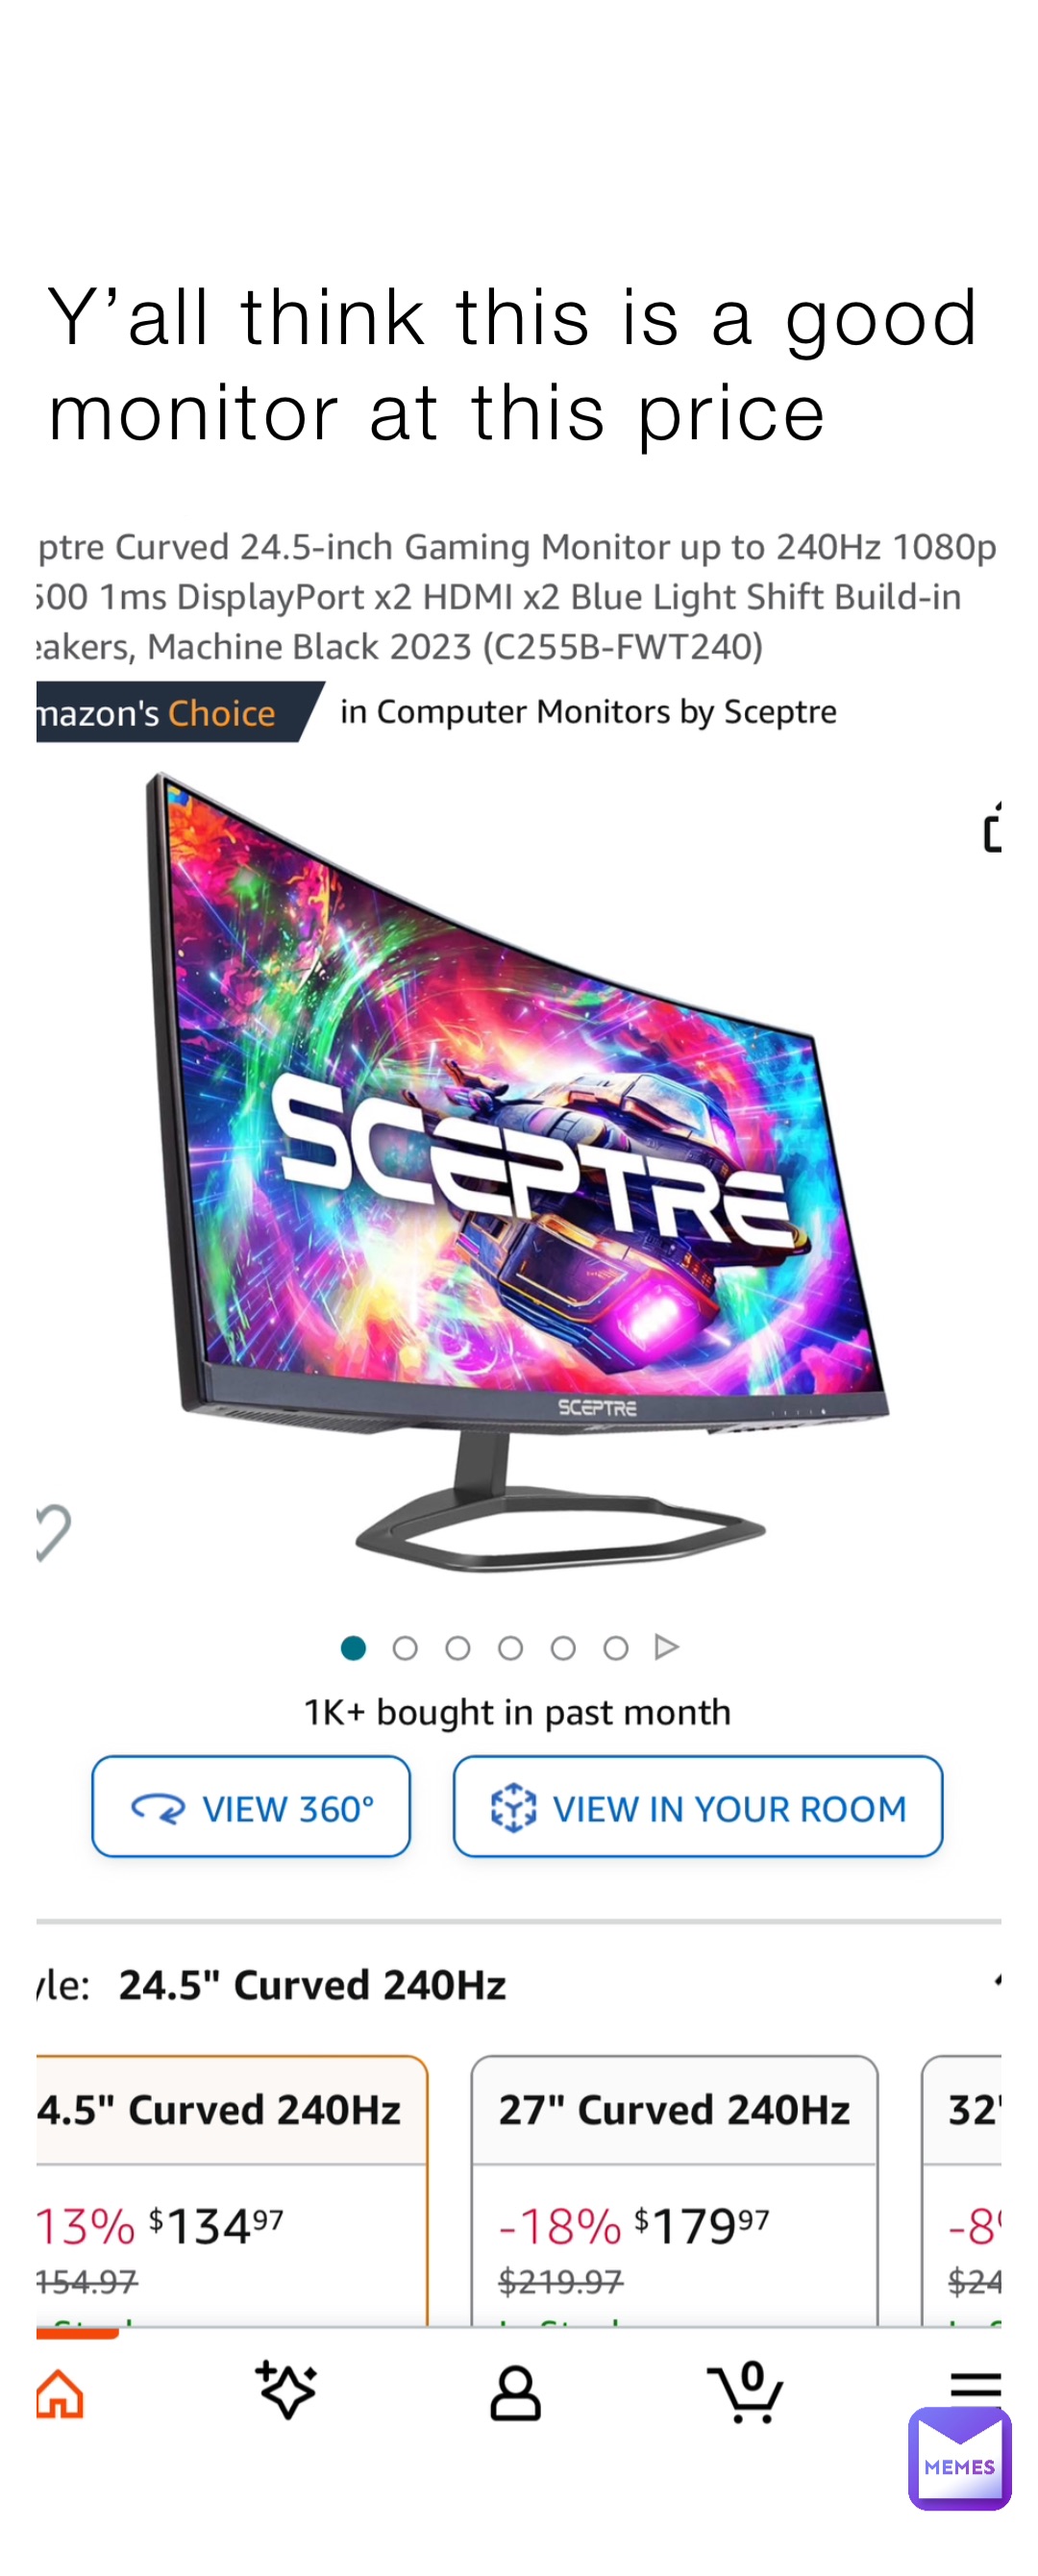 Y’all think this is a good monitor at this price